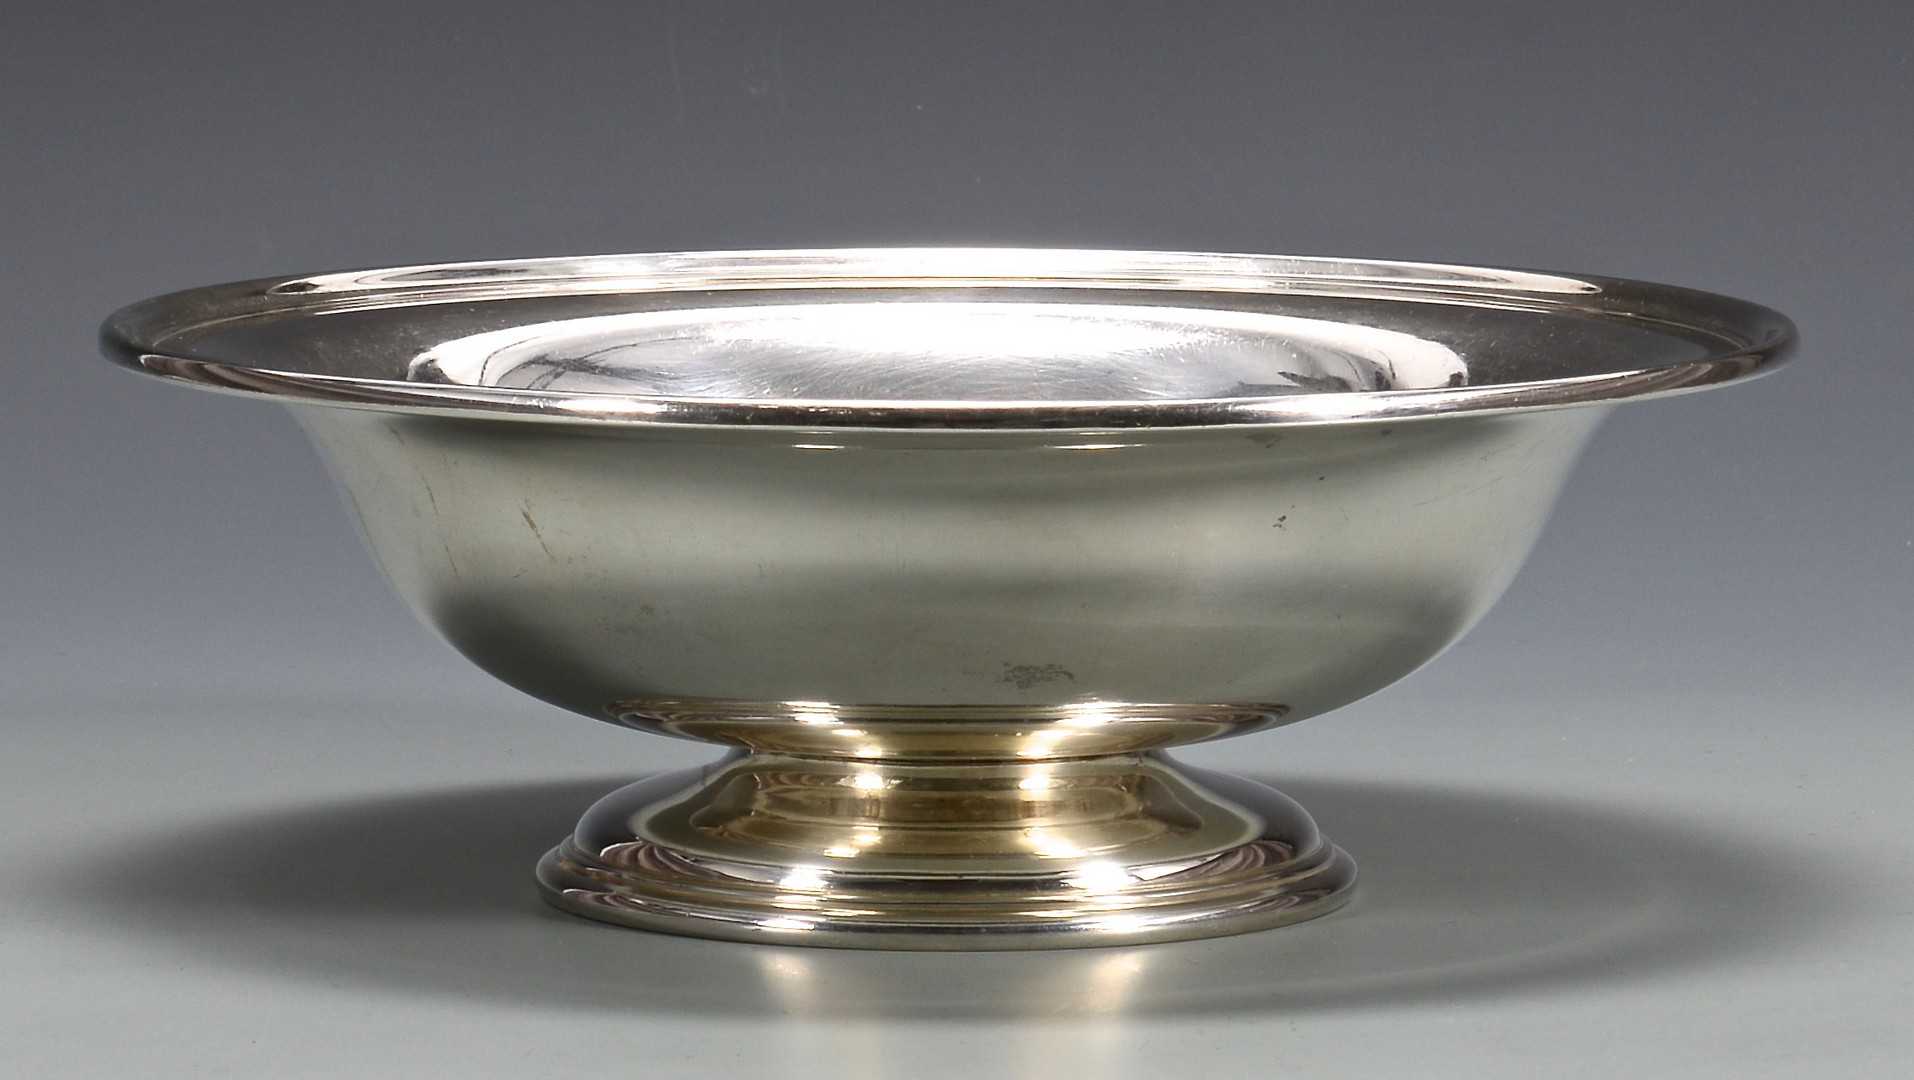 Lot 571: 5 Sterling Silver Bowls/Trays